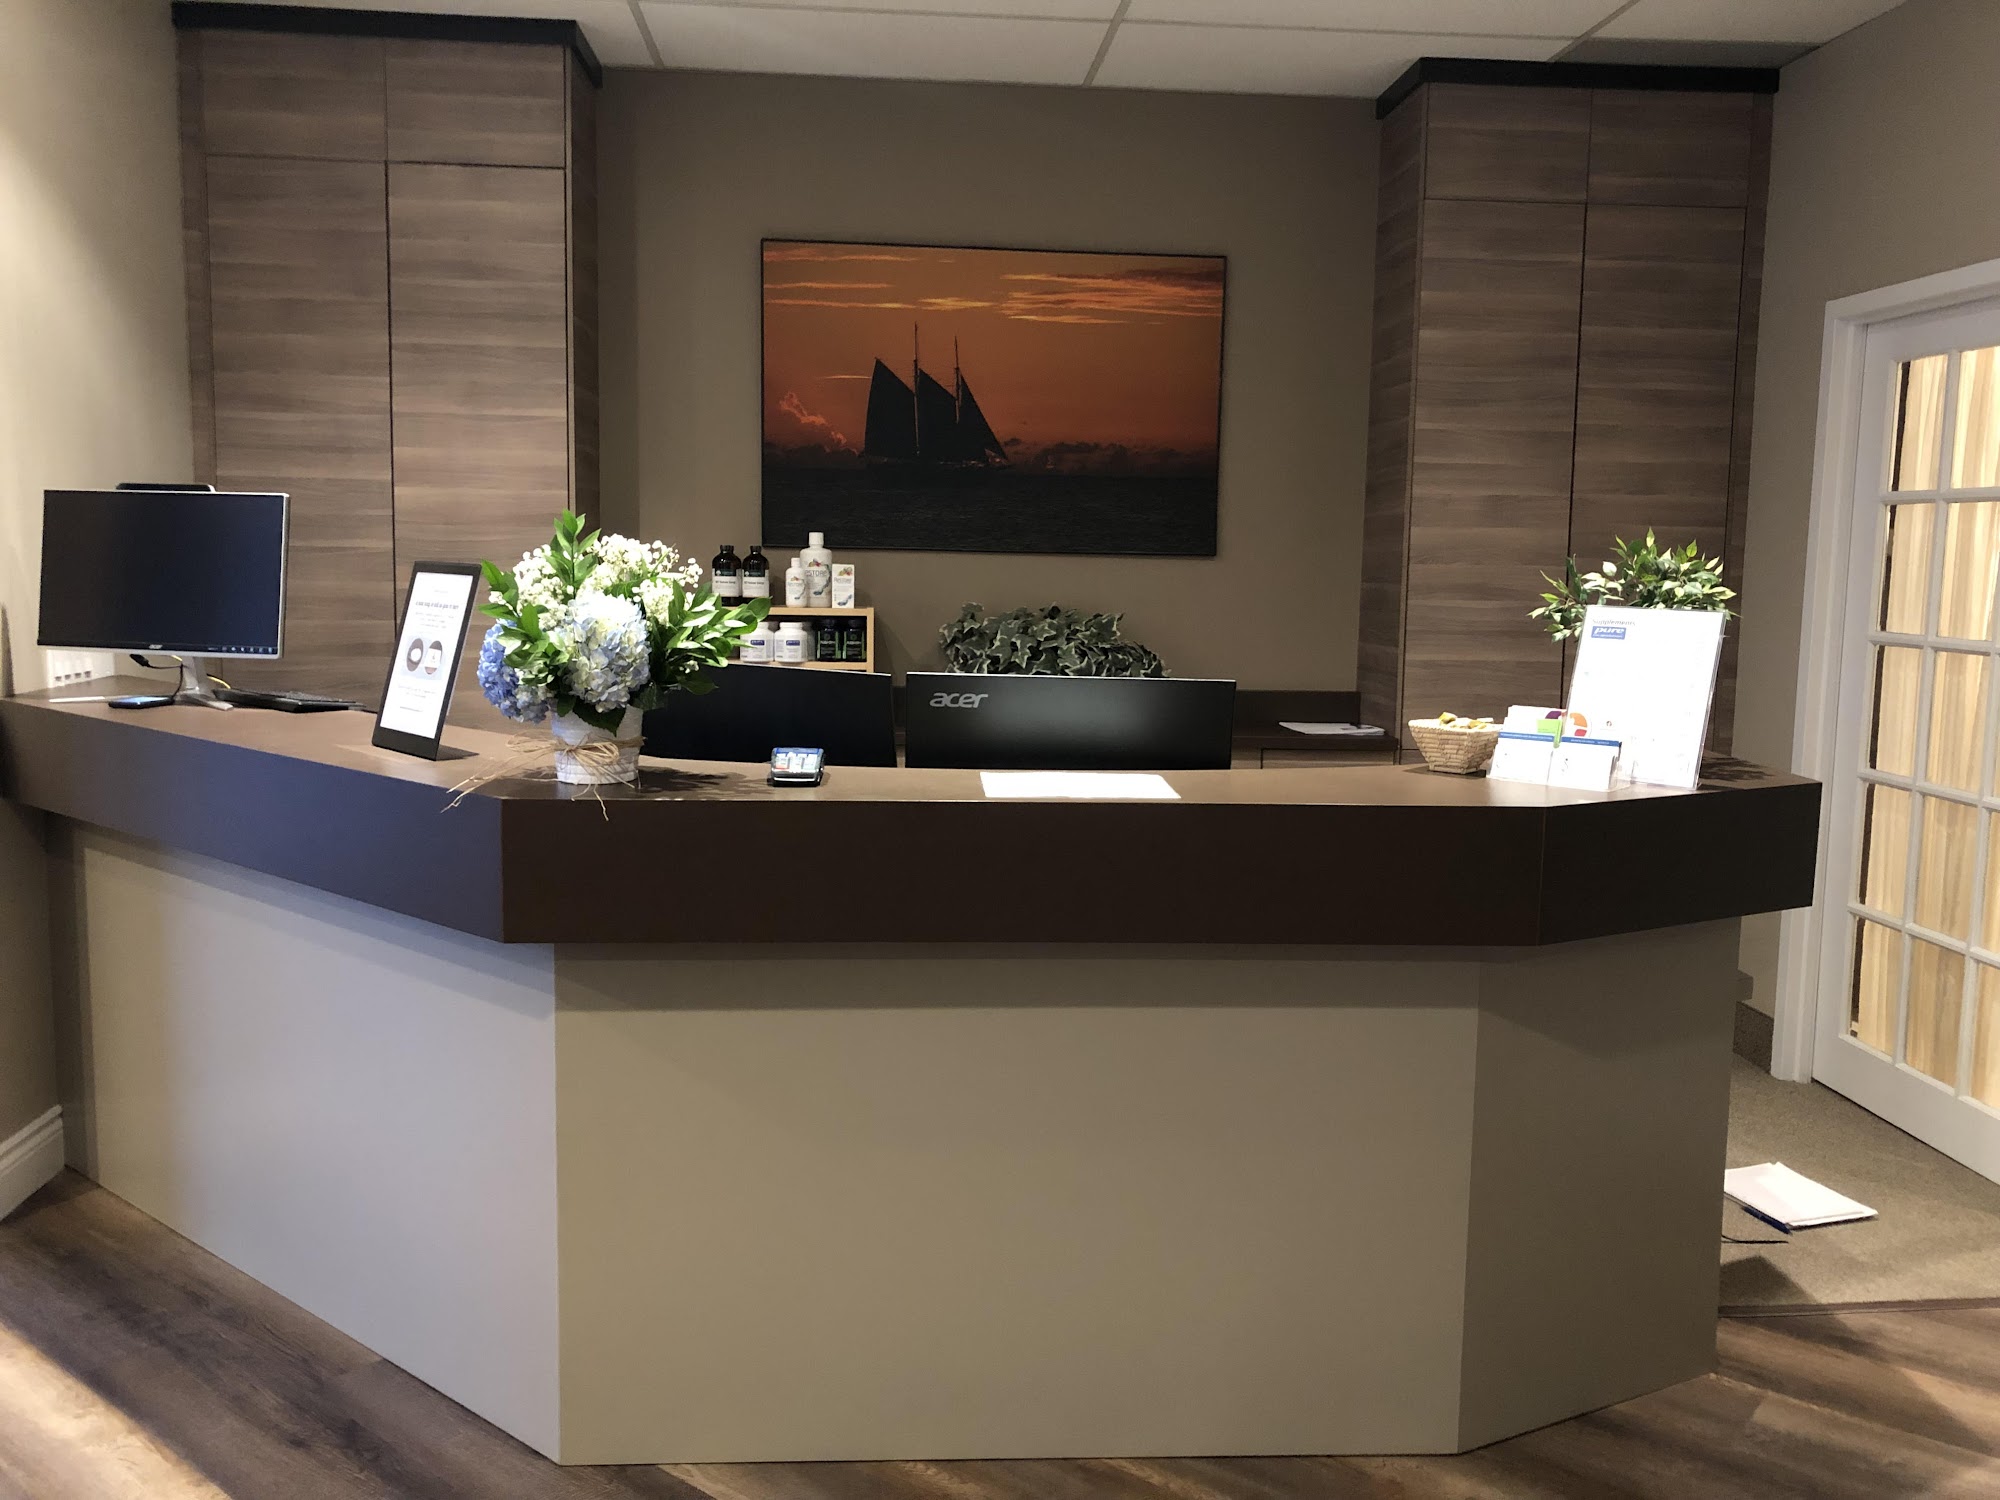 Shaw Chiropractic Family Wellness Centre